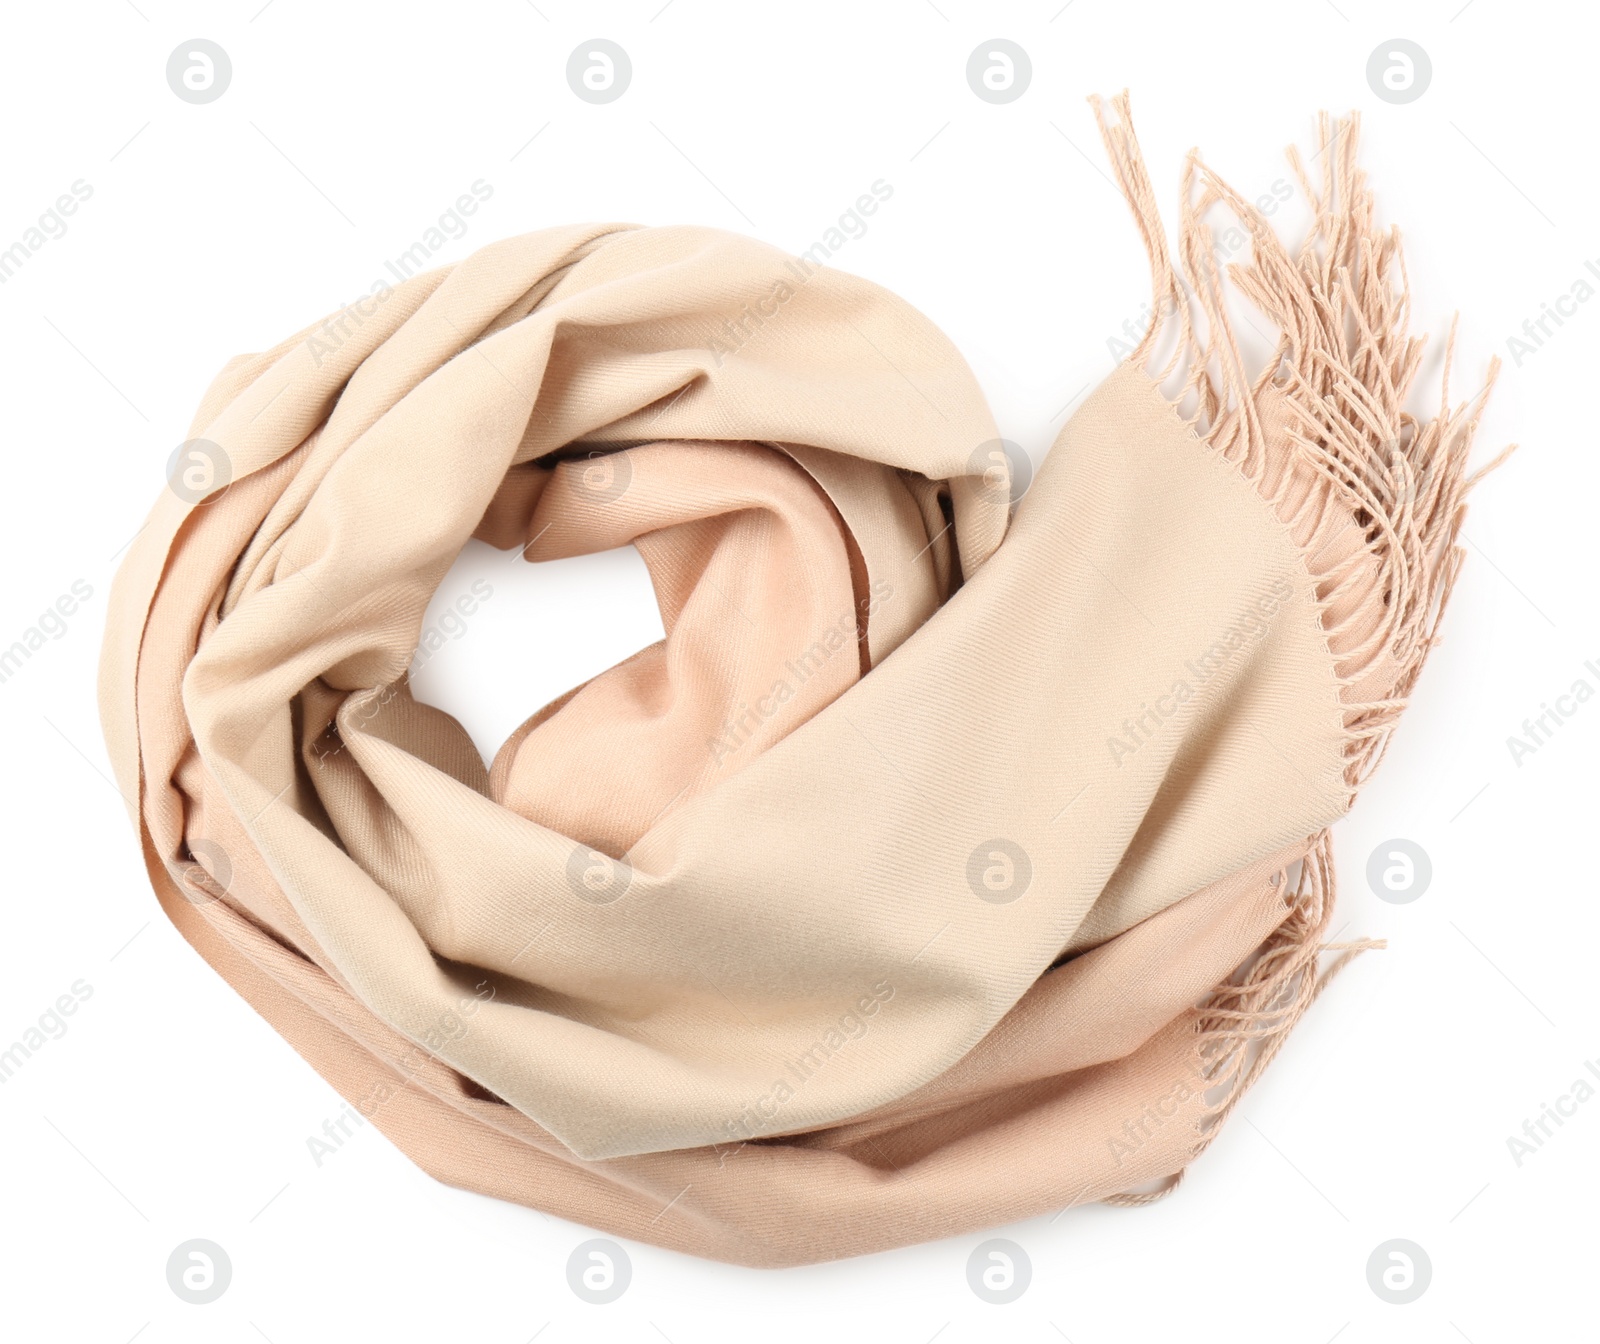 Photo of Soft cashmere scarf isolated on white, top view